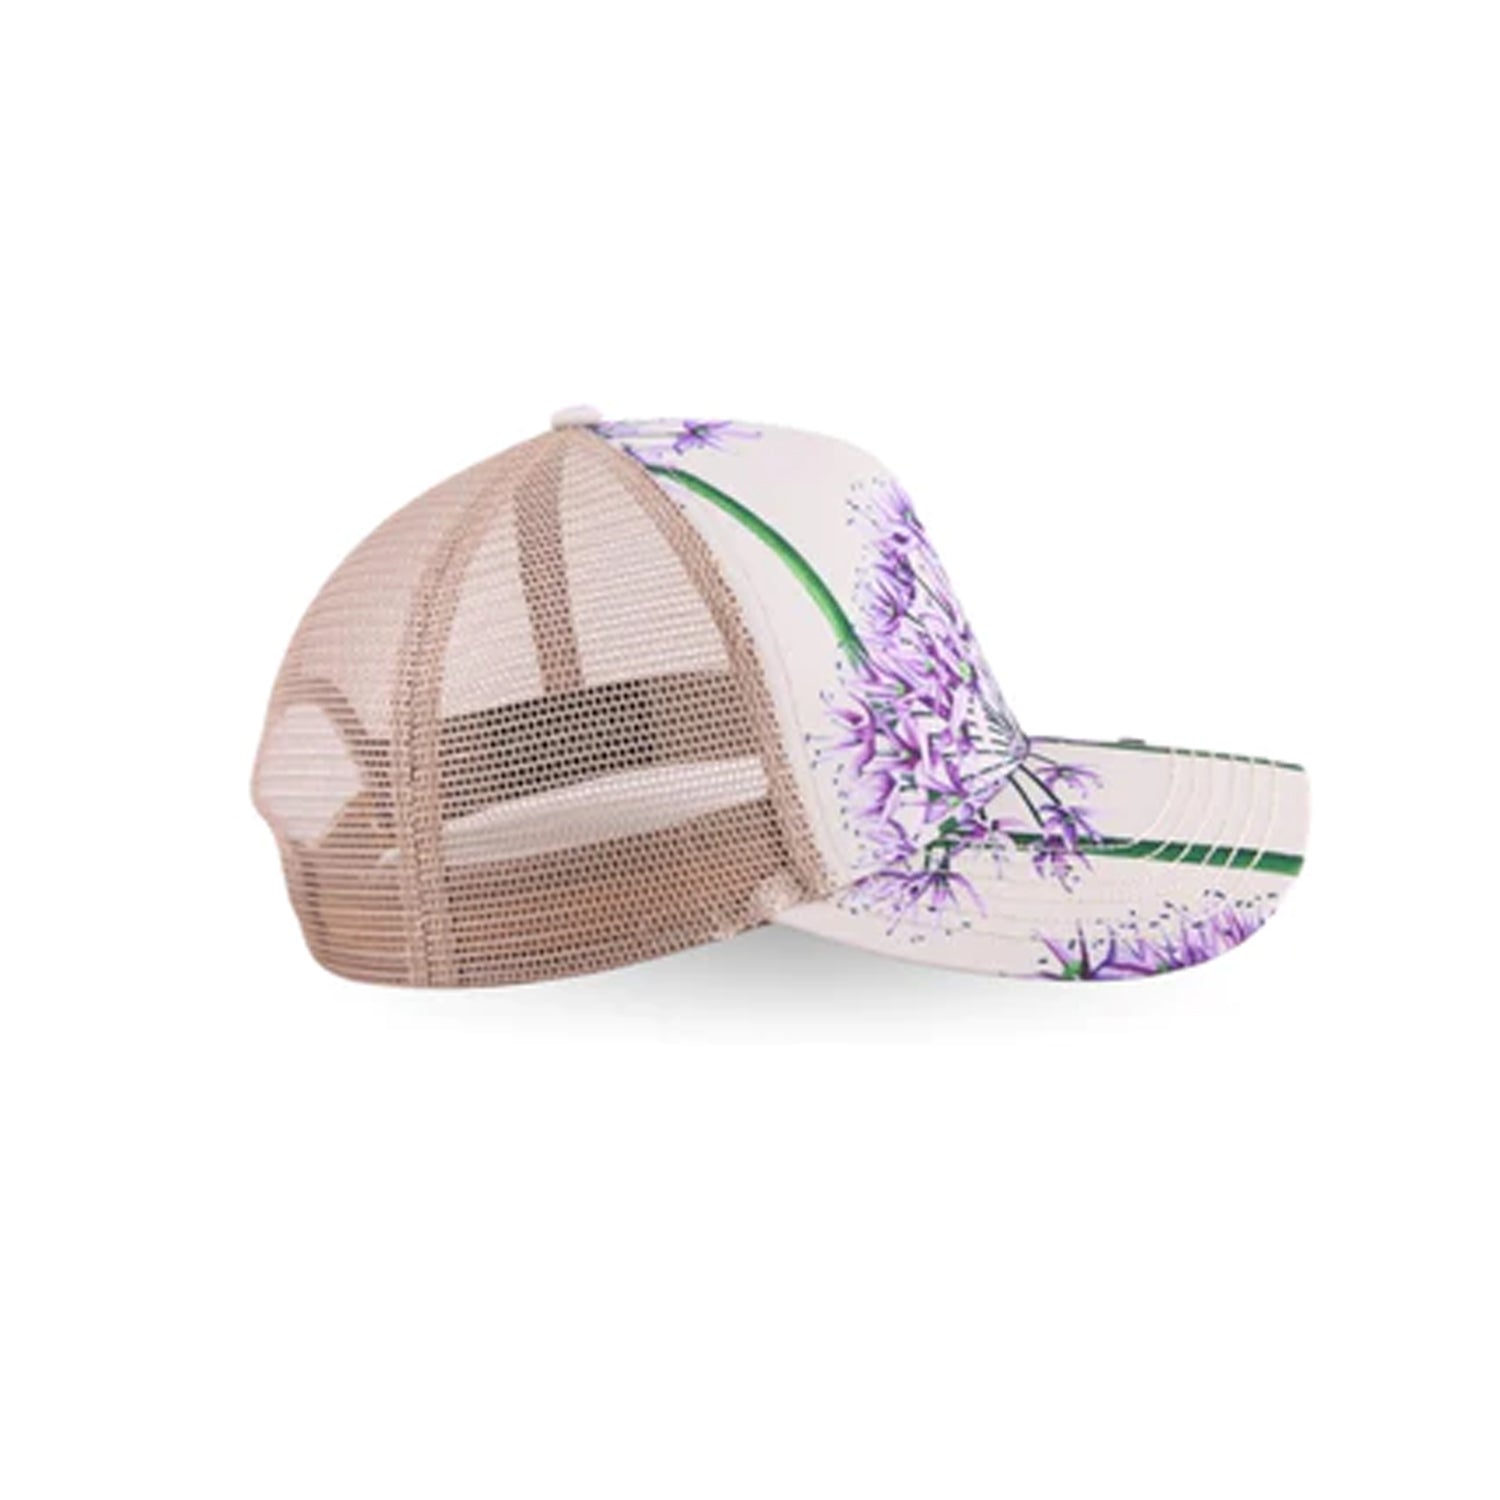 BEIGE BASEBALL CAP WITH A LAVENDER PRINT FROM HOUSE OF CENMAR